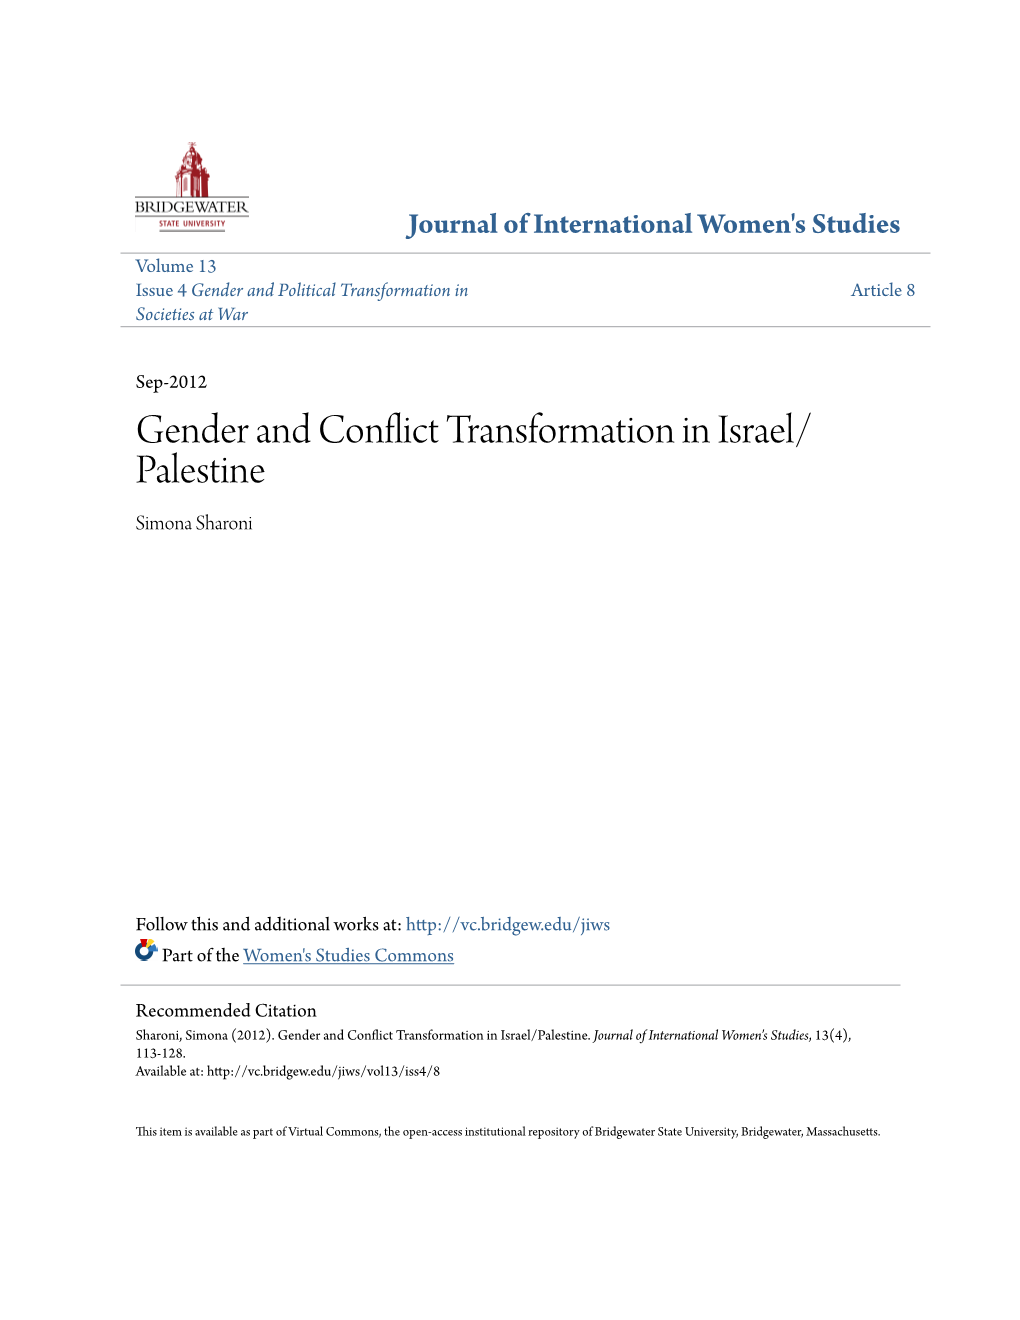 Gender and Conflict Transformation in Israel/Palestine